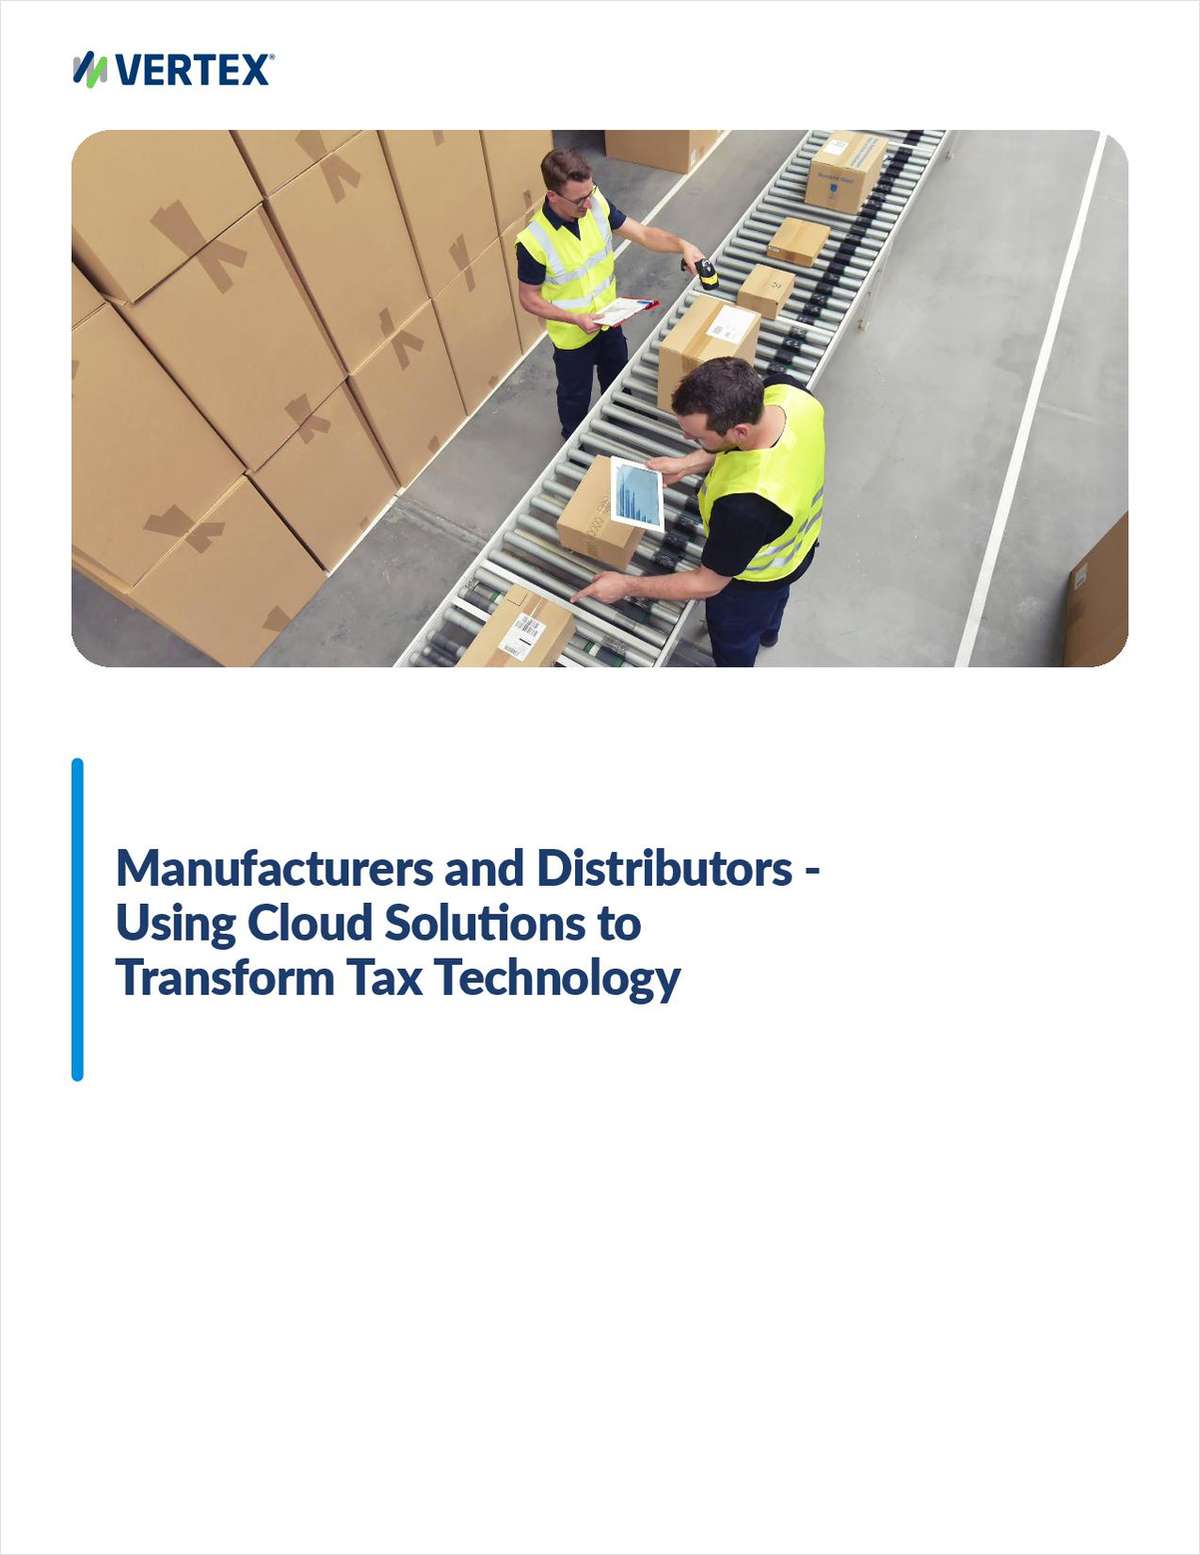 Manufacturers and Distributors -- Using Cloud Solutions to Transform Tax Technology